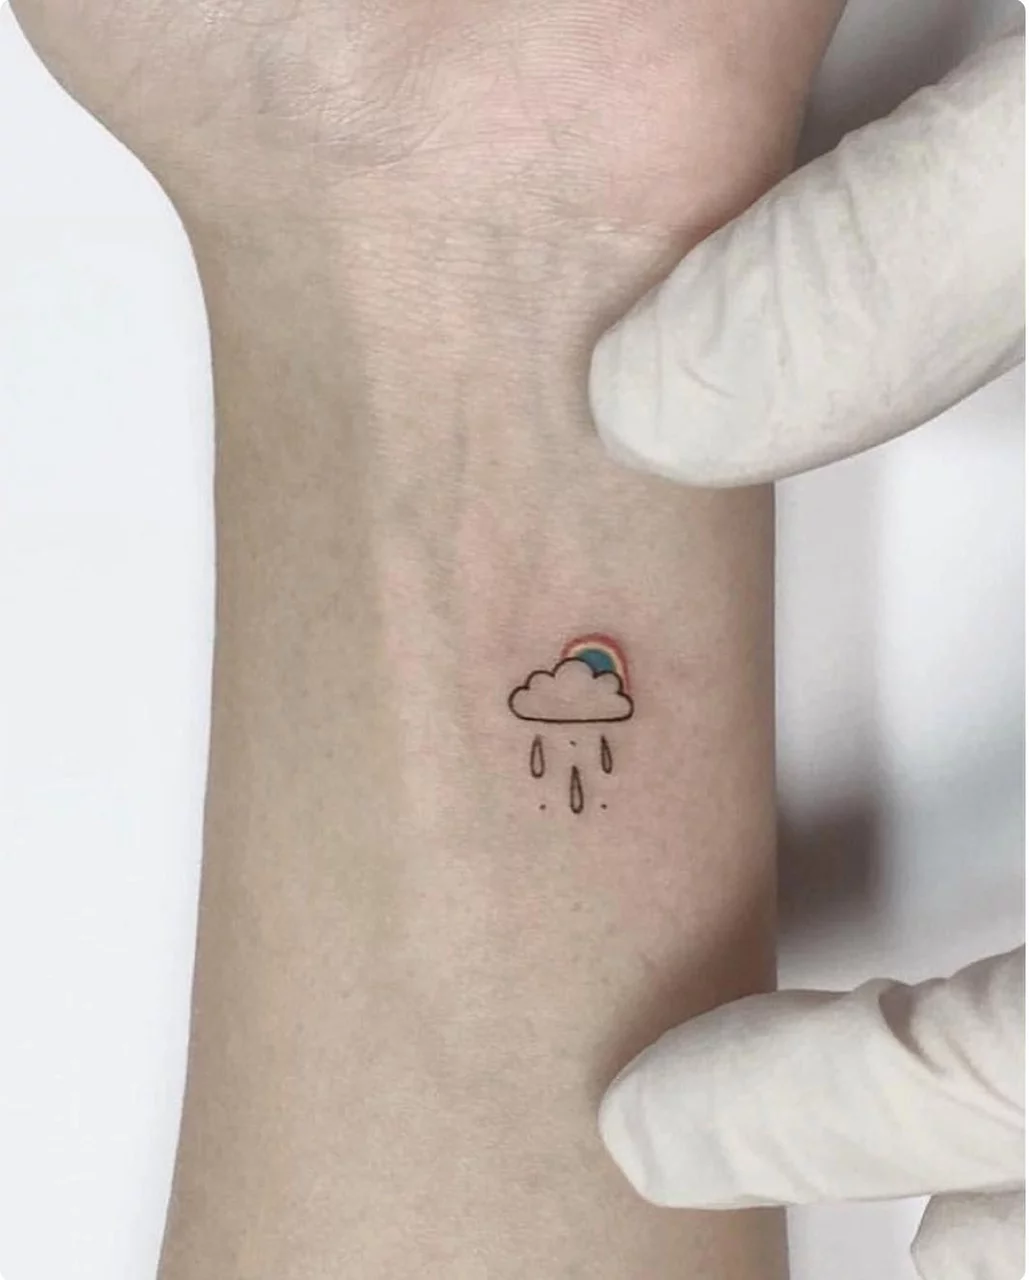 Buy Rain Cloud Temporary Tattoo Sticker set of 2 Online in India  Etsy